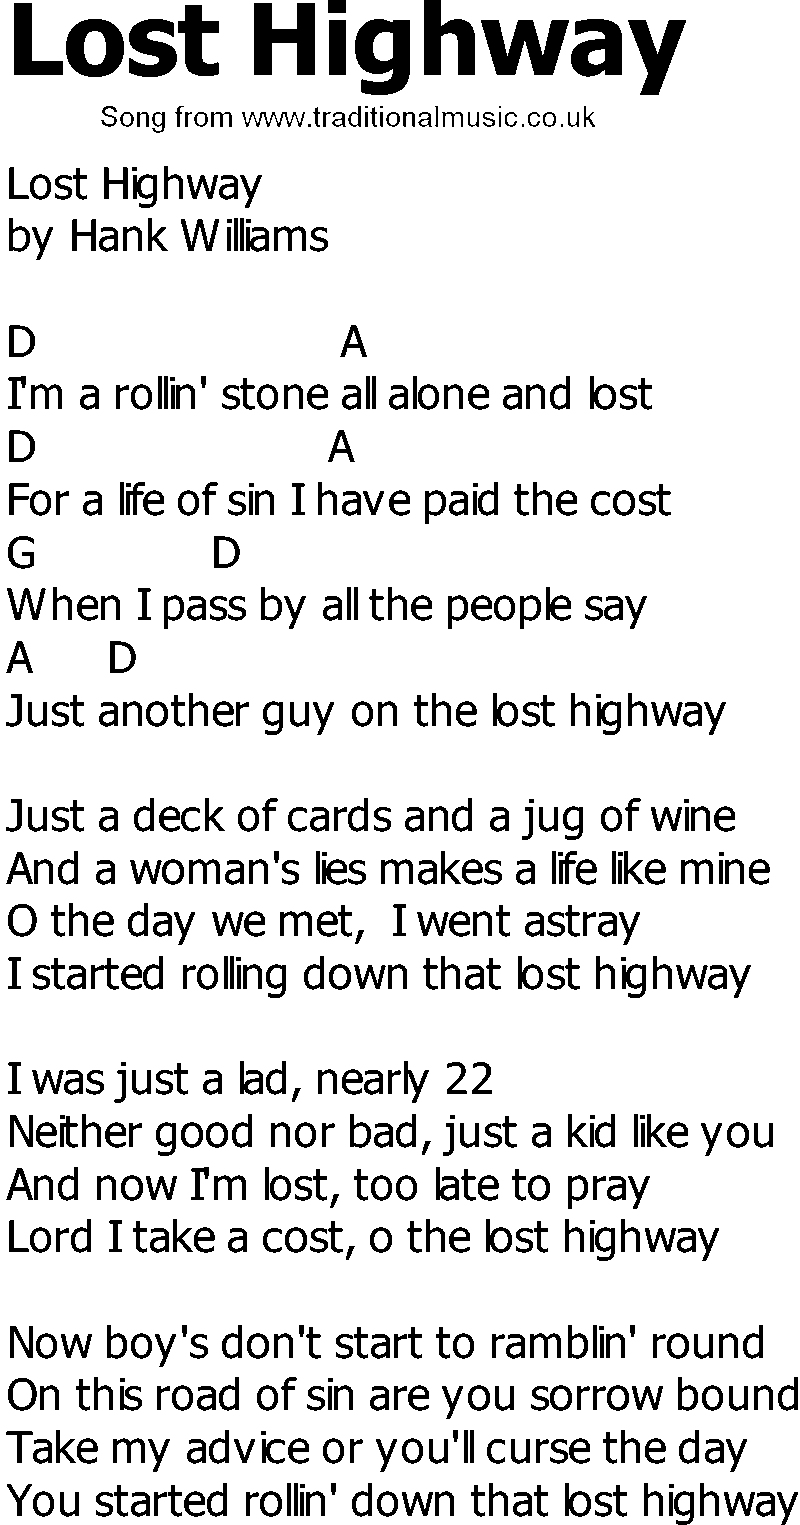 Old Country song lyrics with chords - Lost Highway